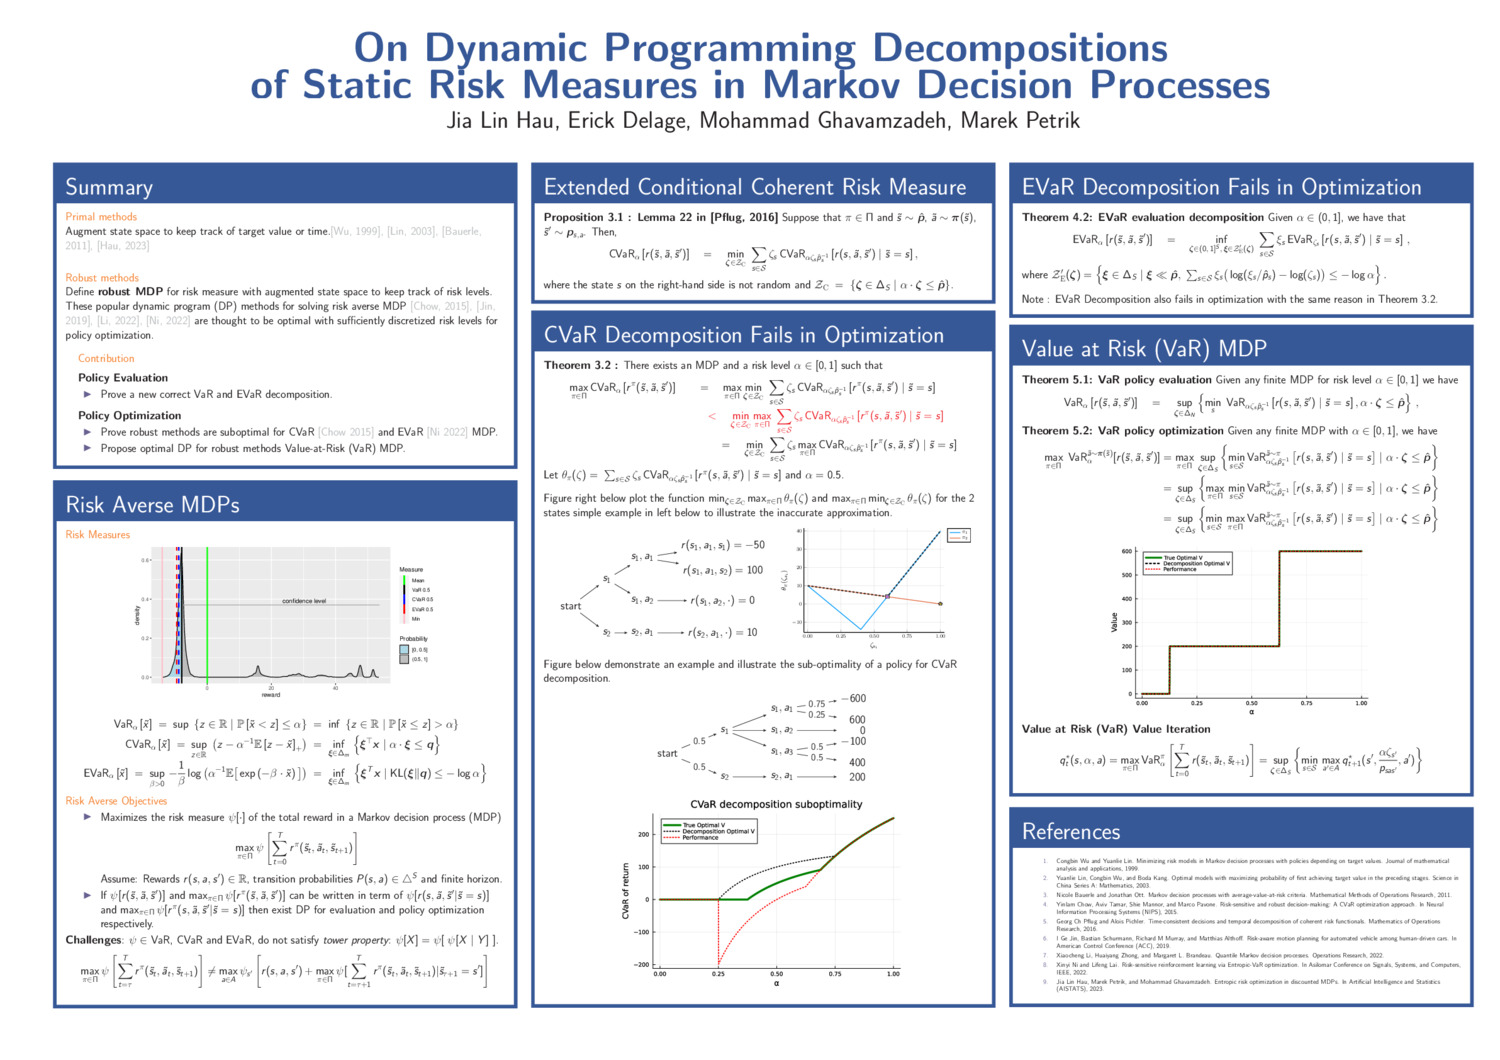 On Dynamic Programming Decompositions Of Static Risk Measures In Markov Decision Processes by marekpetrik